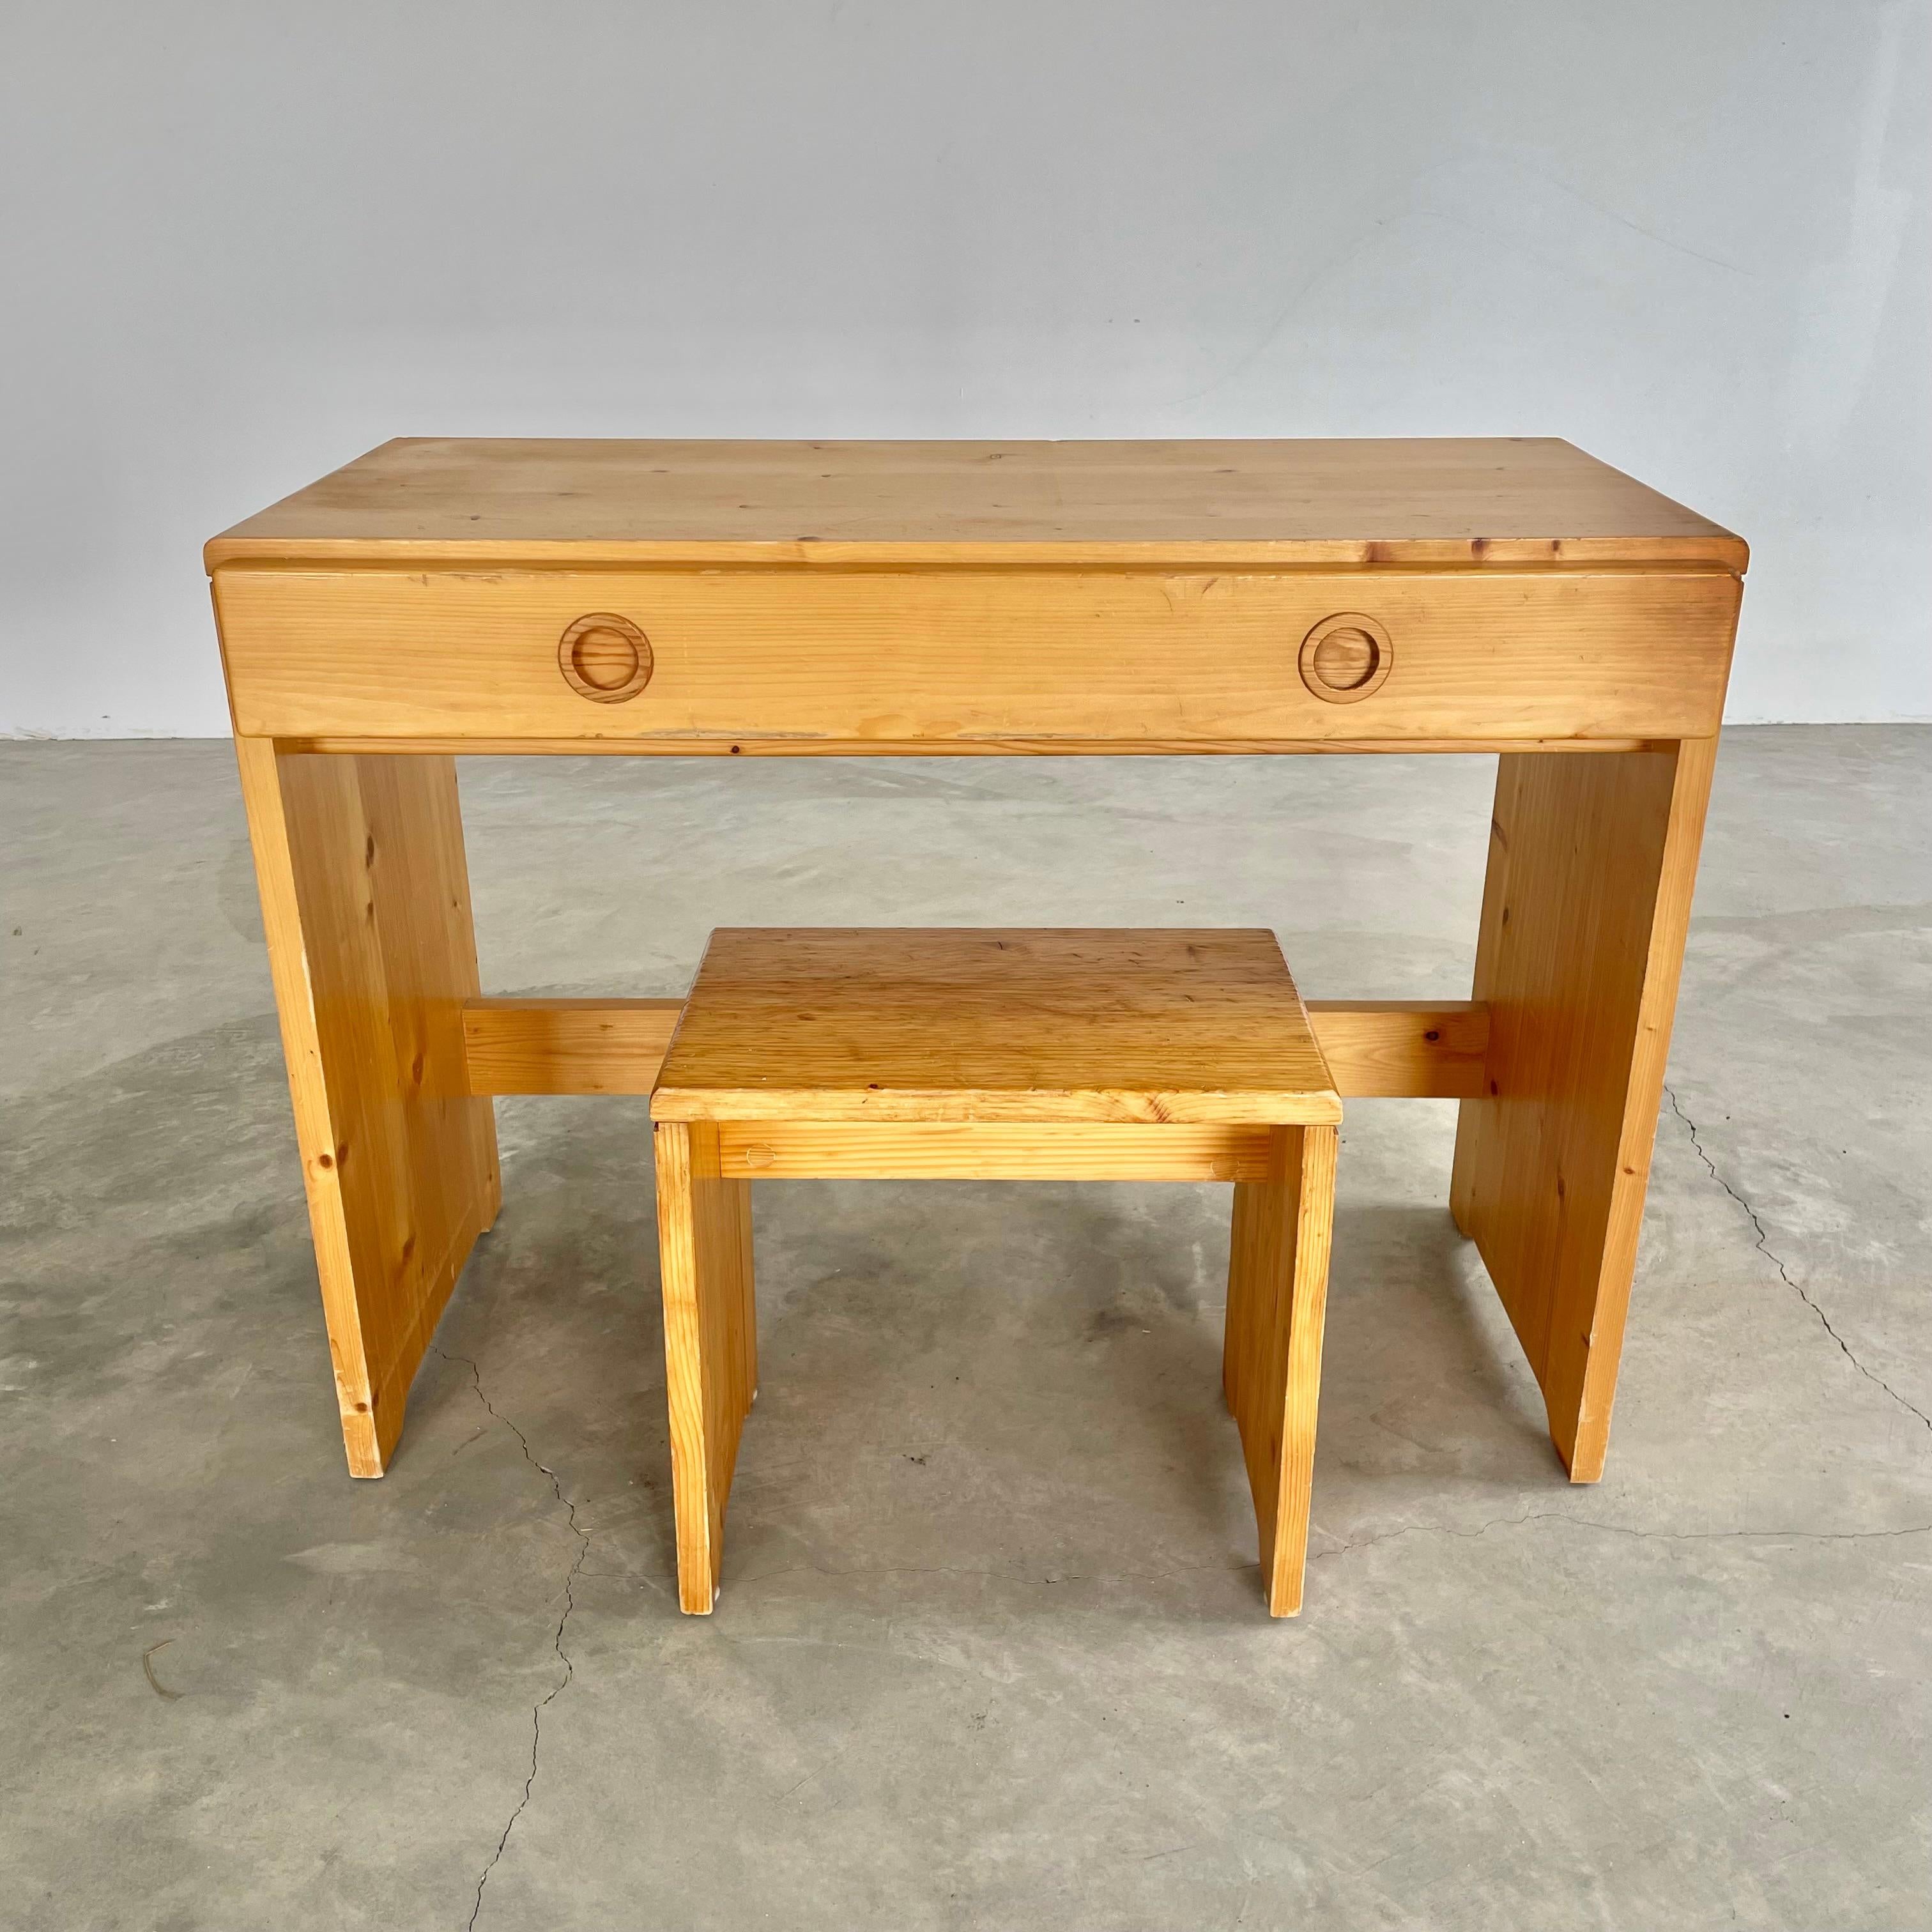 Mid-Century Modern Charlotte Perriand Pine Desk for Les Arcs with Matching Stool, 1960s France For Sale